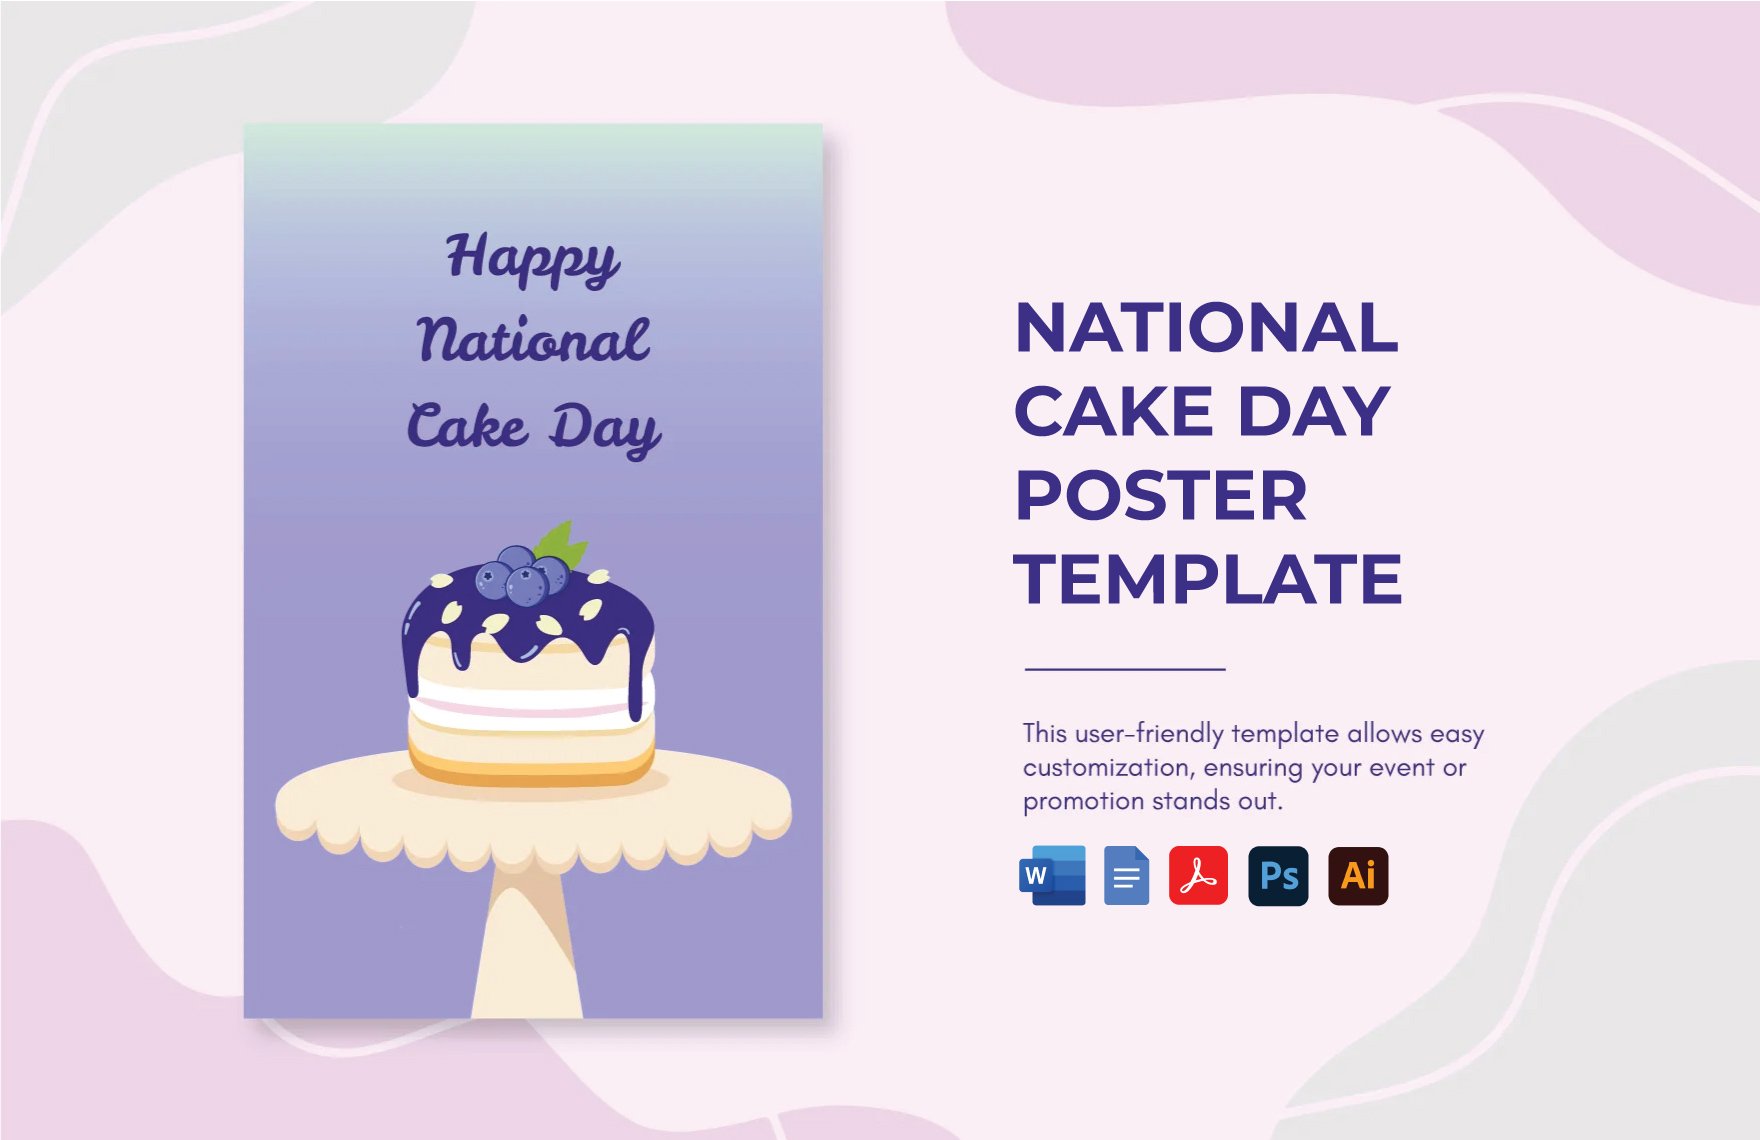 National Cake Day Poster Template in Word, Google Docs, PDF, Illustrator, PSD